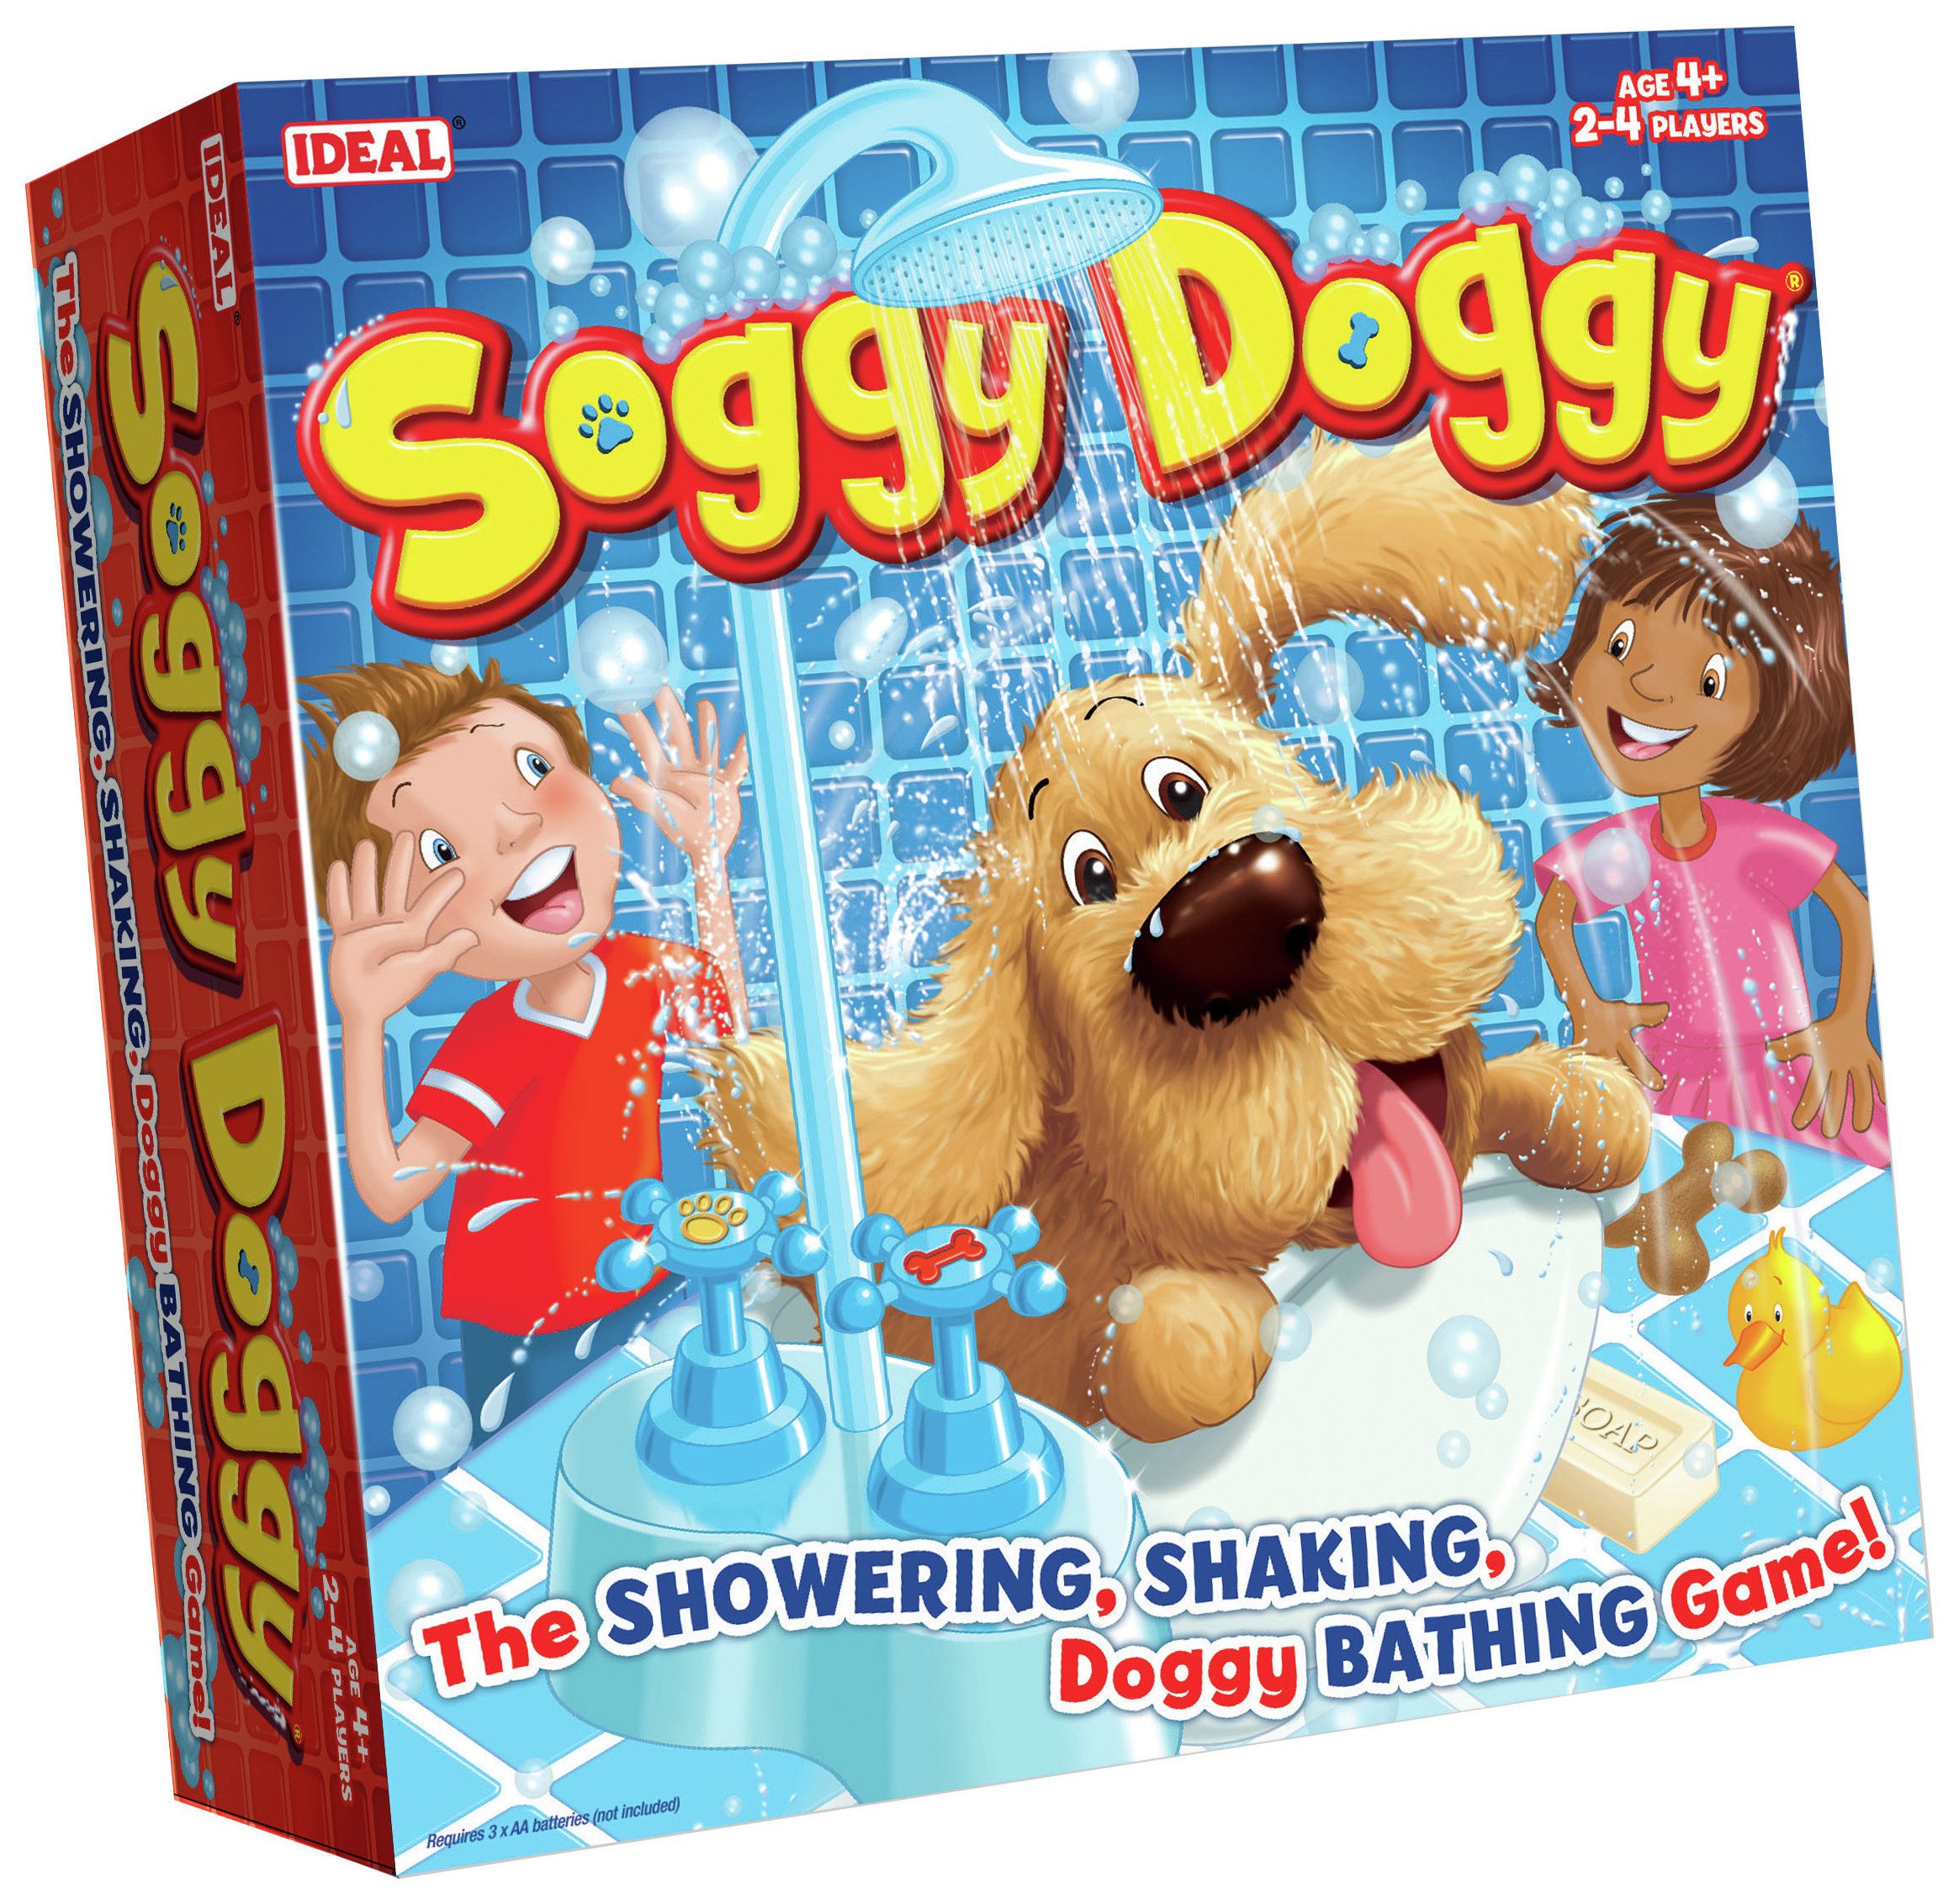 Ideal Soggy Doggy Game